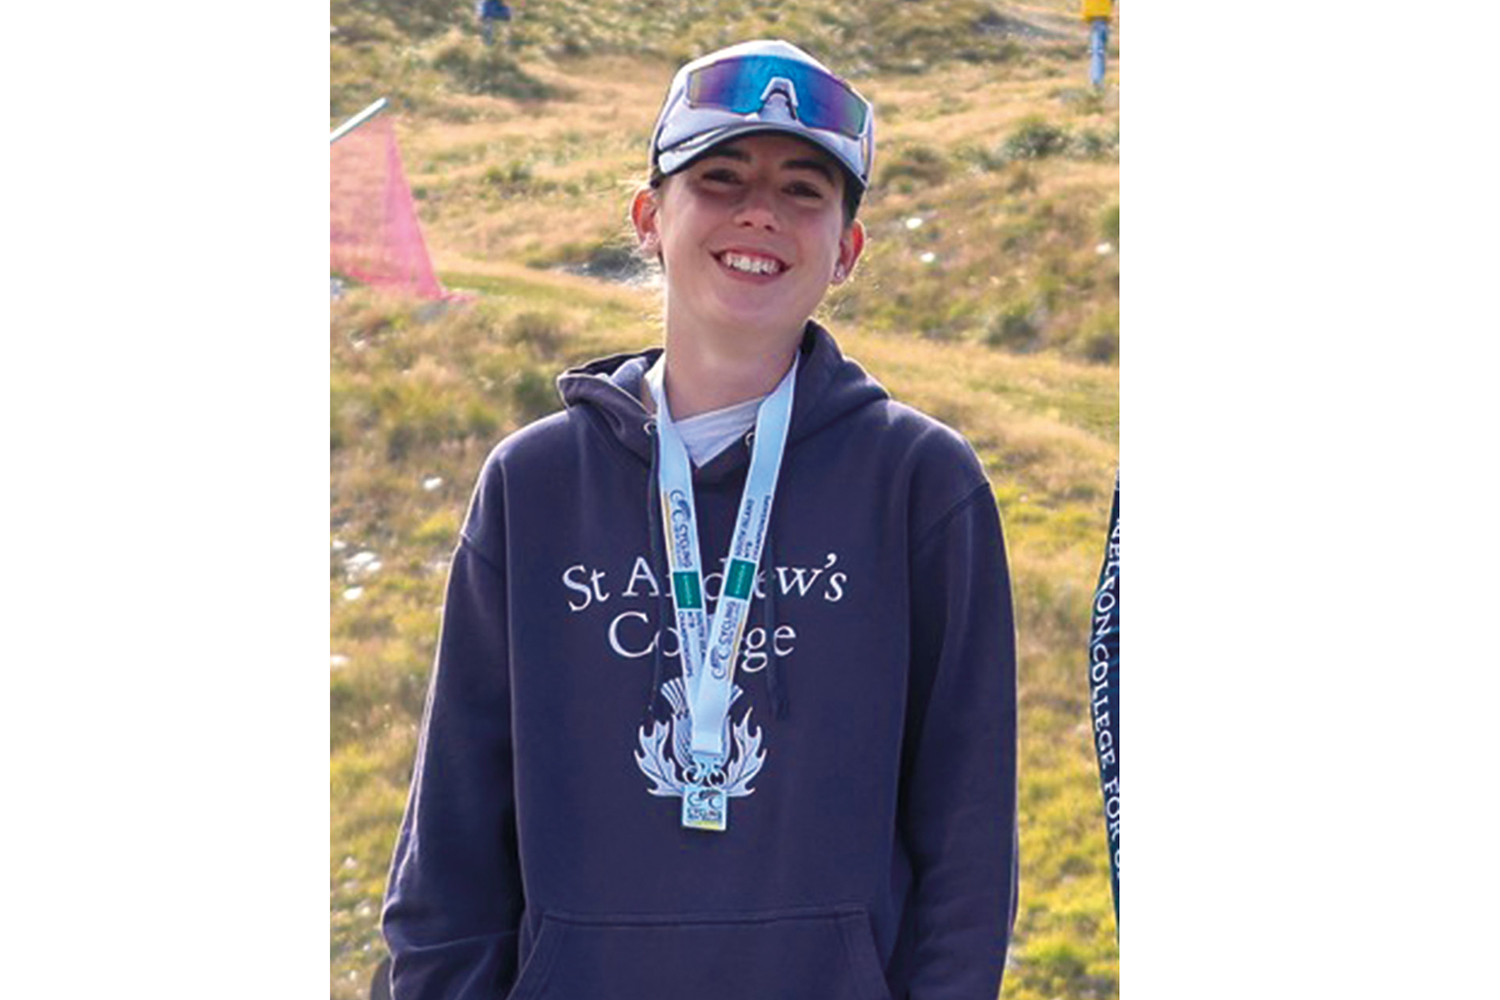 St Andrew's College student Abigail Scott Douglas after winning second place at the South Island Secondary Schools' Mountain Biking Championships.